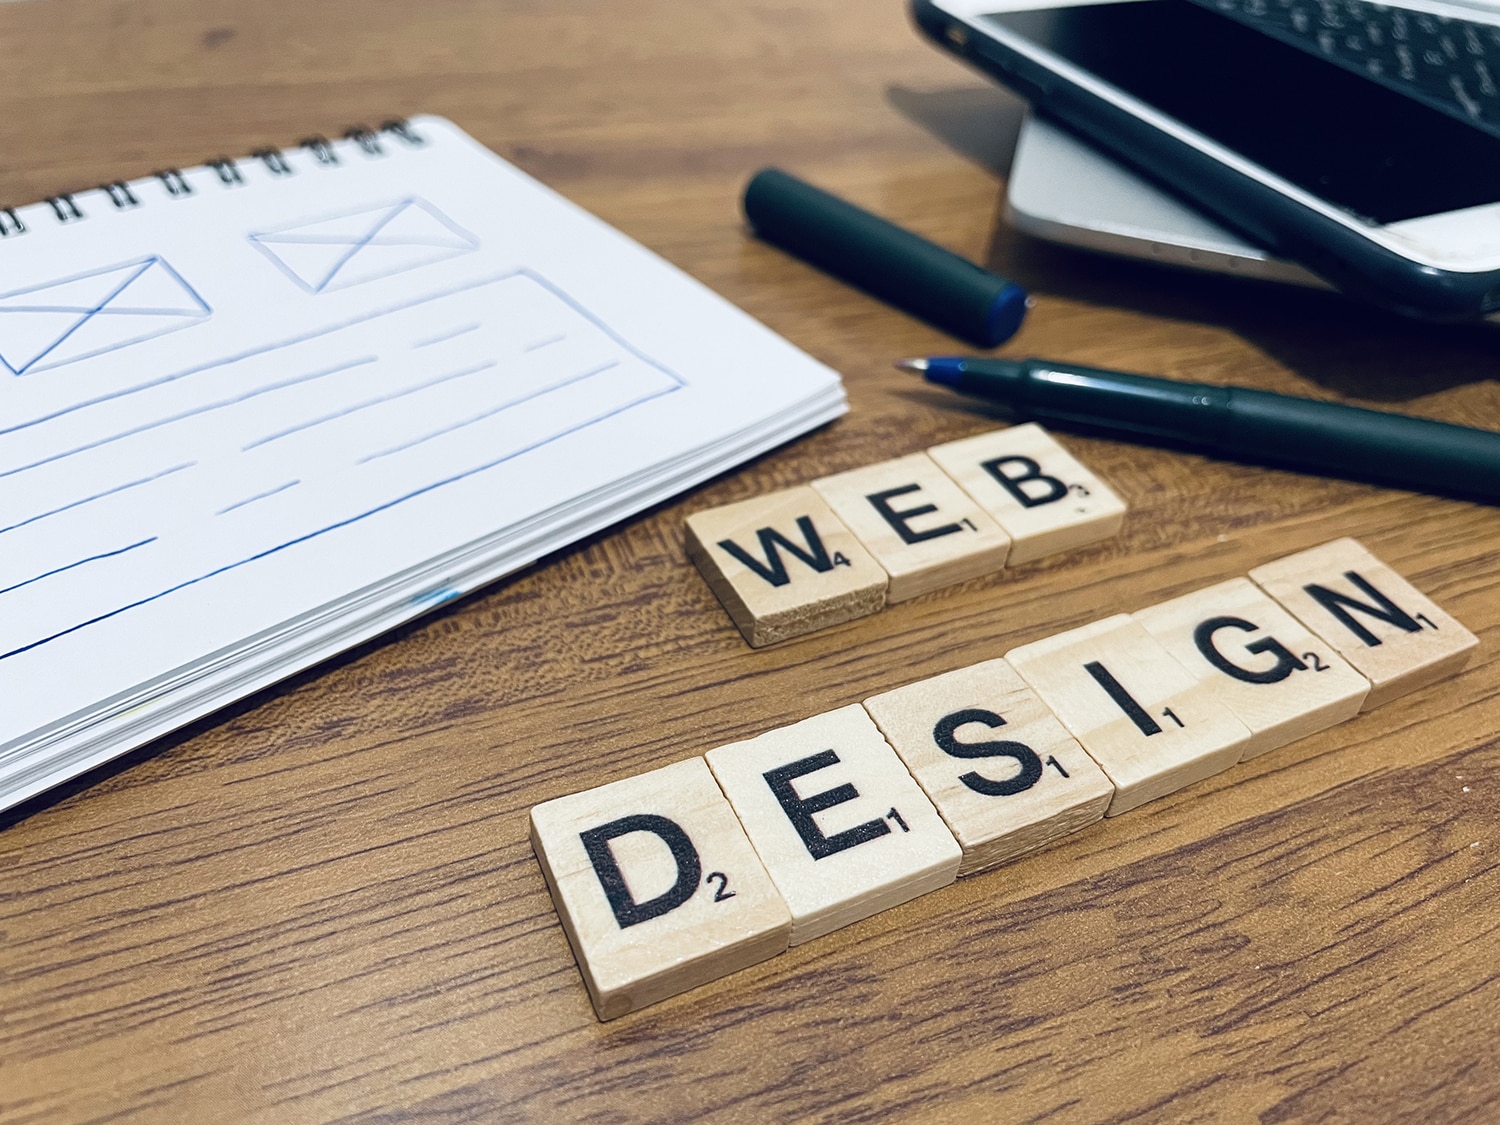 5 Ways A Fort Lauderdale Web Design Agency Can Improve Your Florida Business